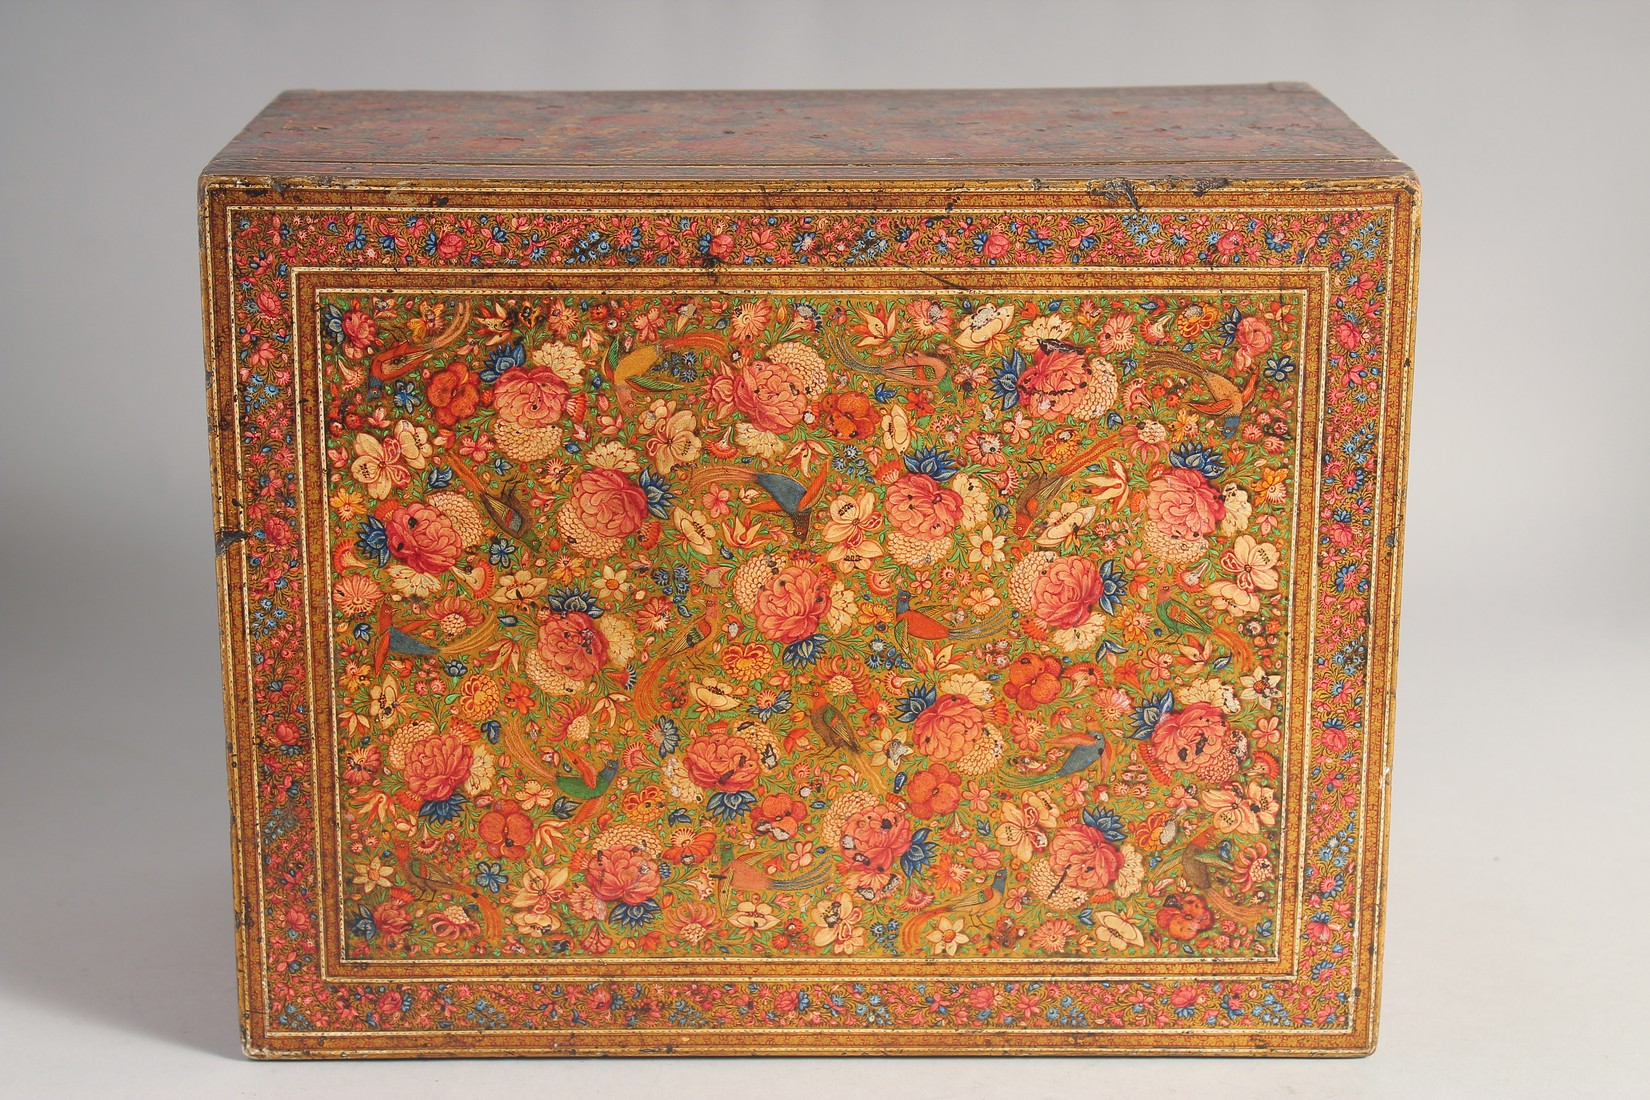 A VERY FINE MID-19TH CENTURY ANGLO-INDIAN KASHMIRI PAINTED, GILDED, AND LACQUERED BOX, depicting - Image 3 of 5